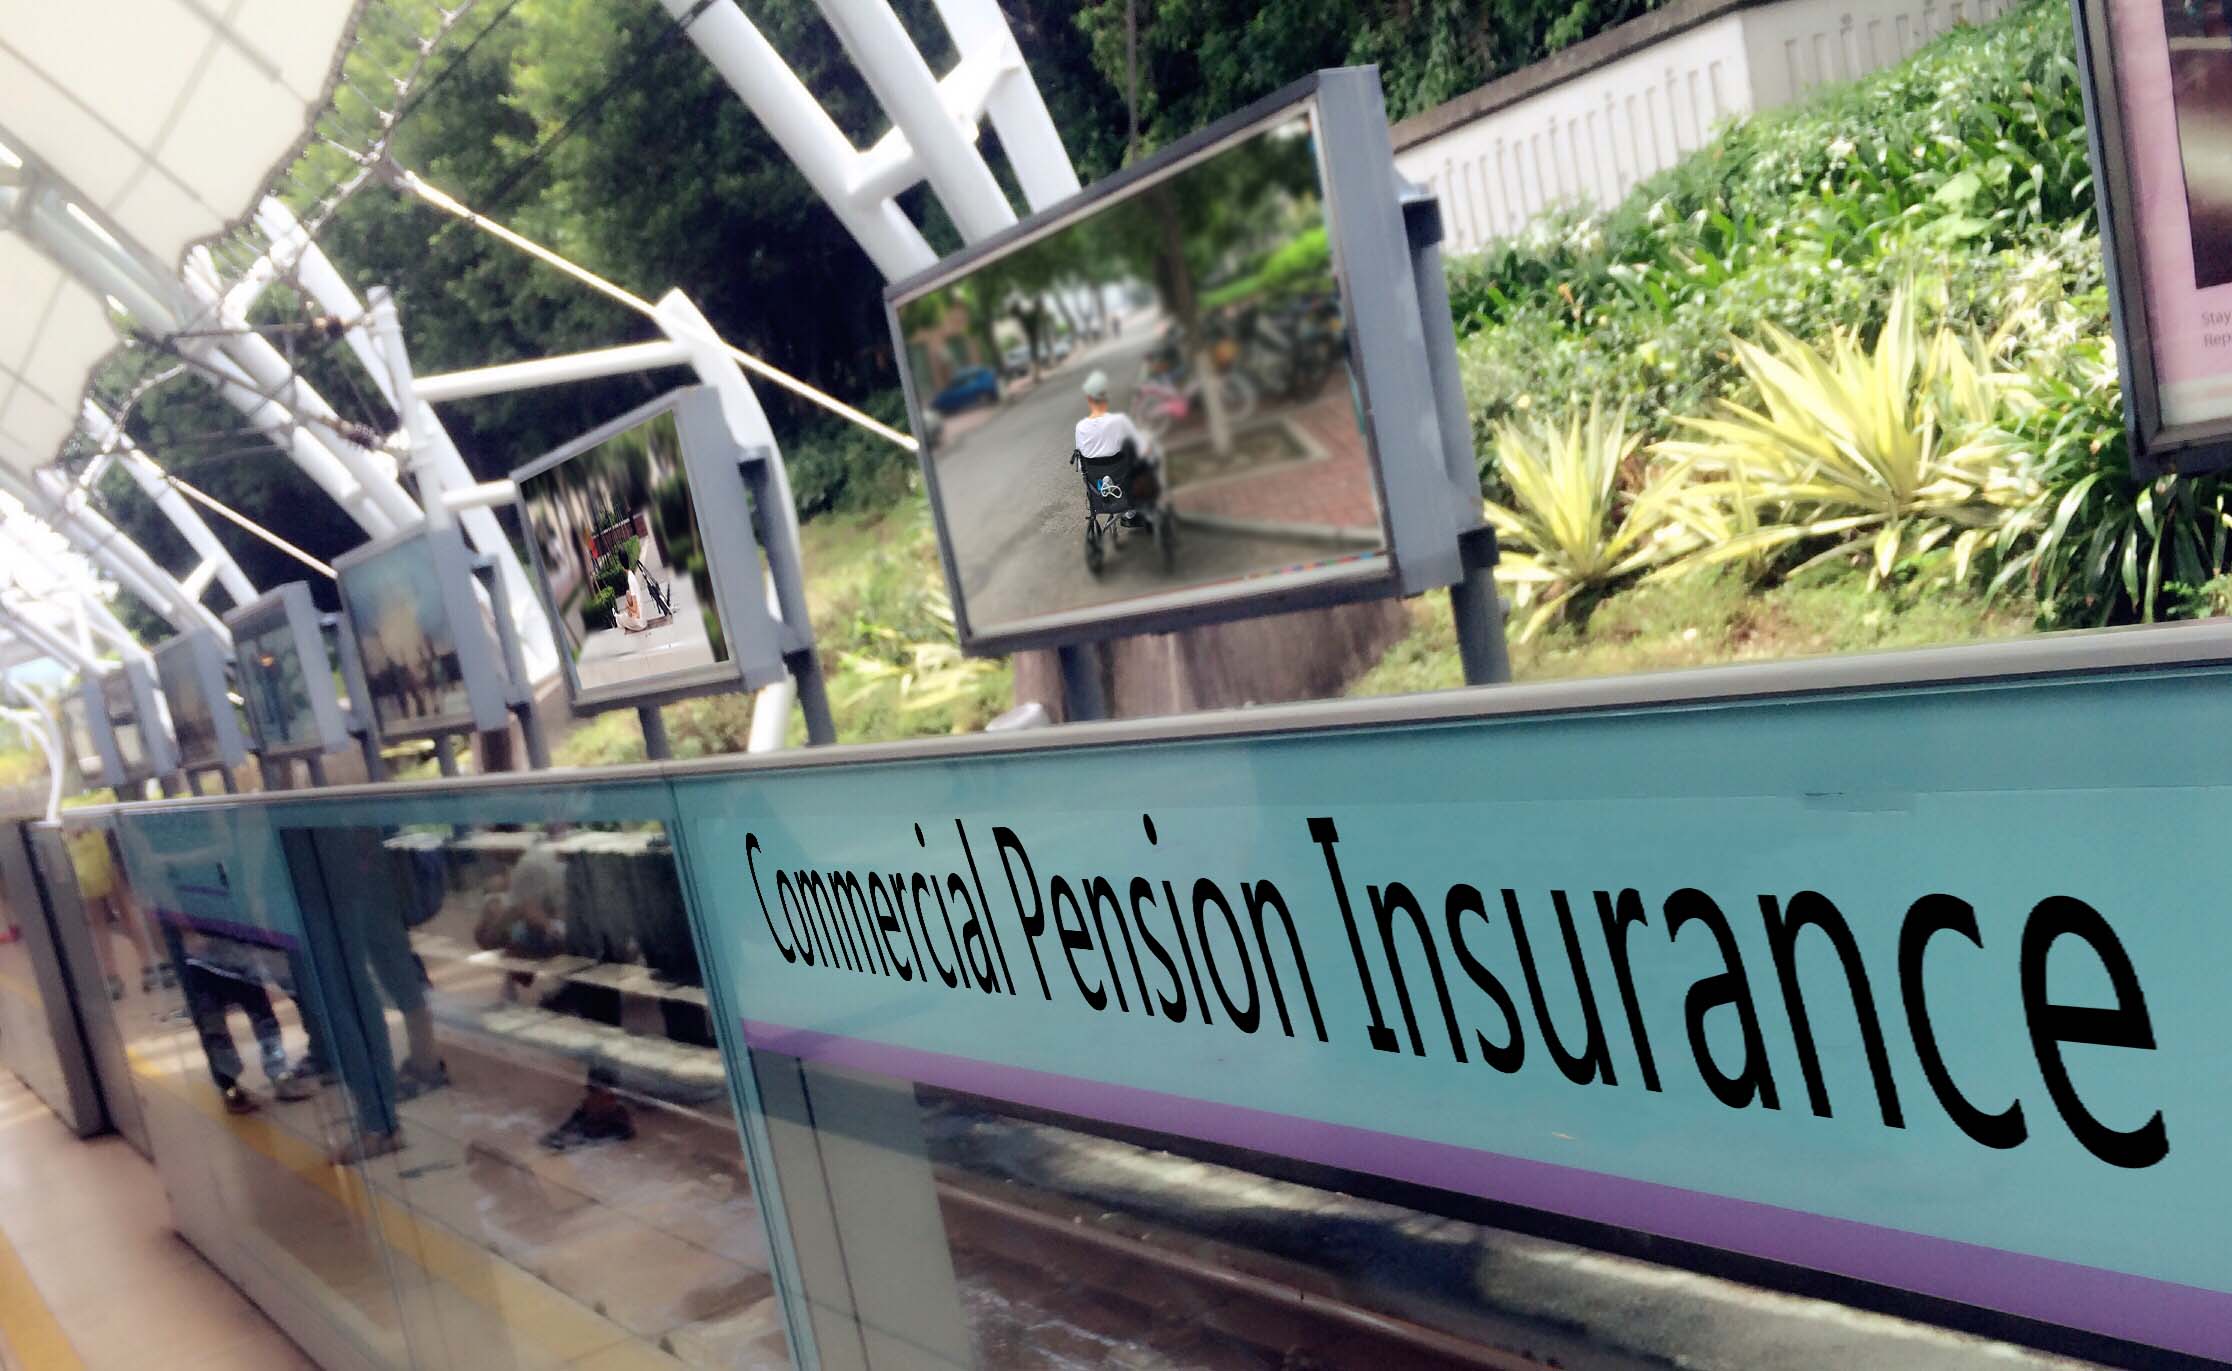 China’s Commercial Pension Insurance